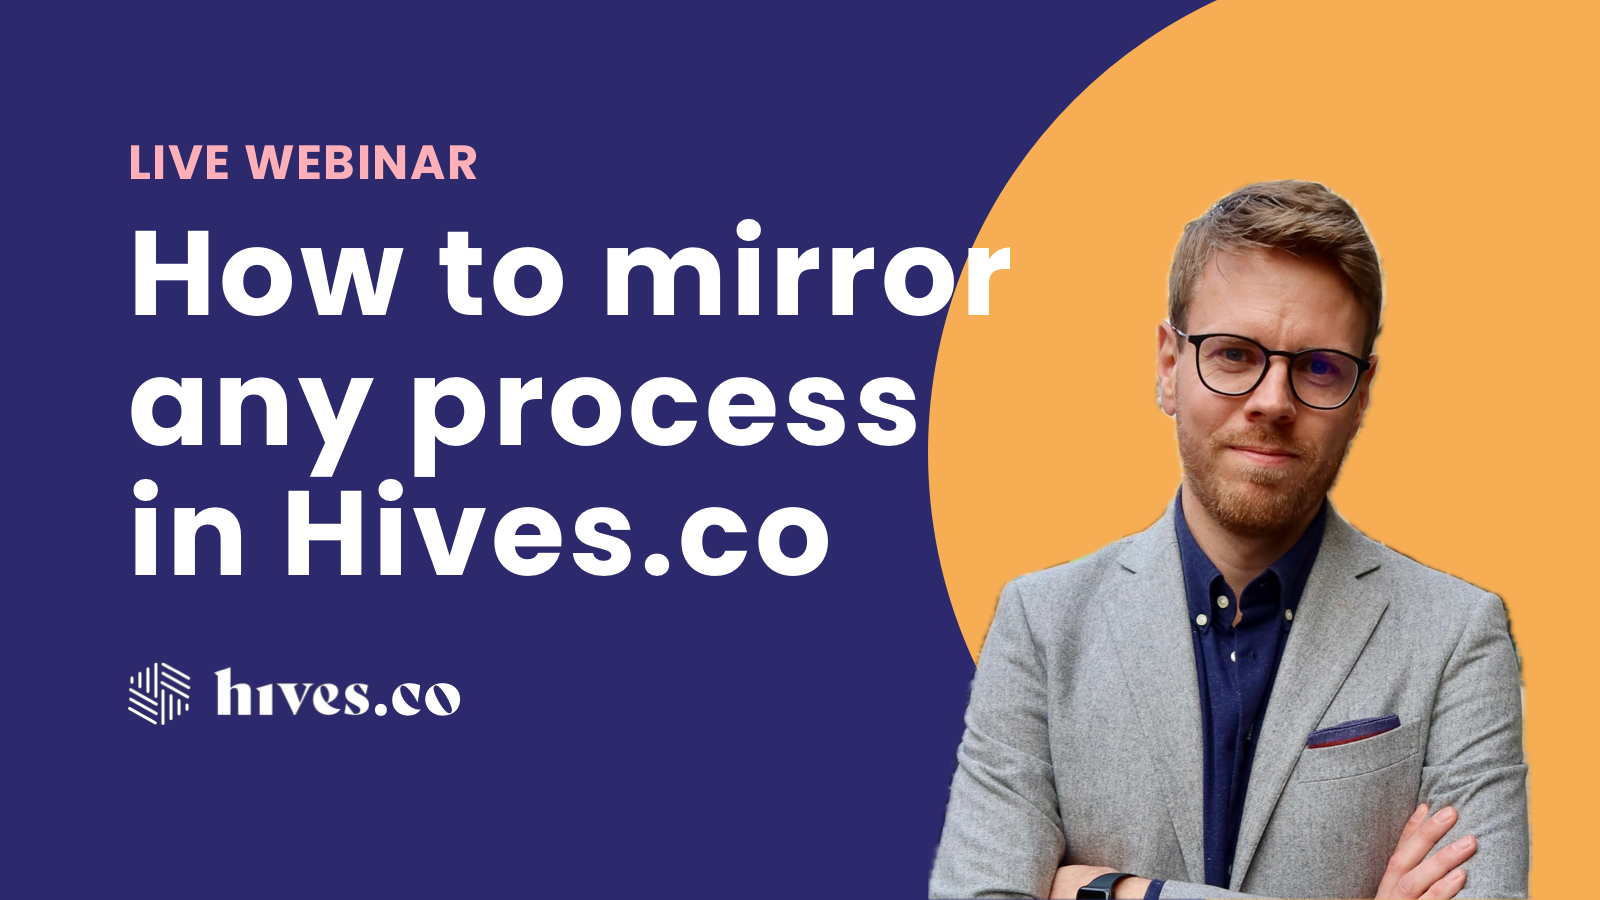 How to mirror any process in Hives.co